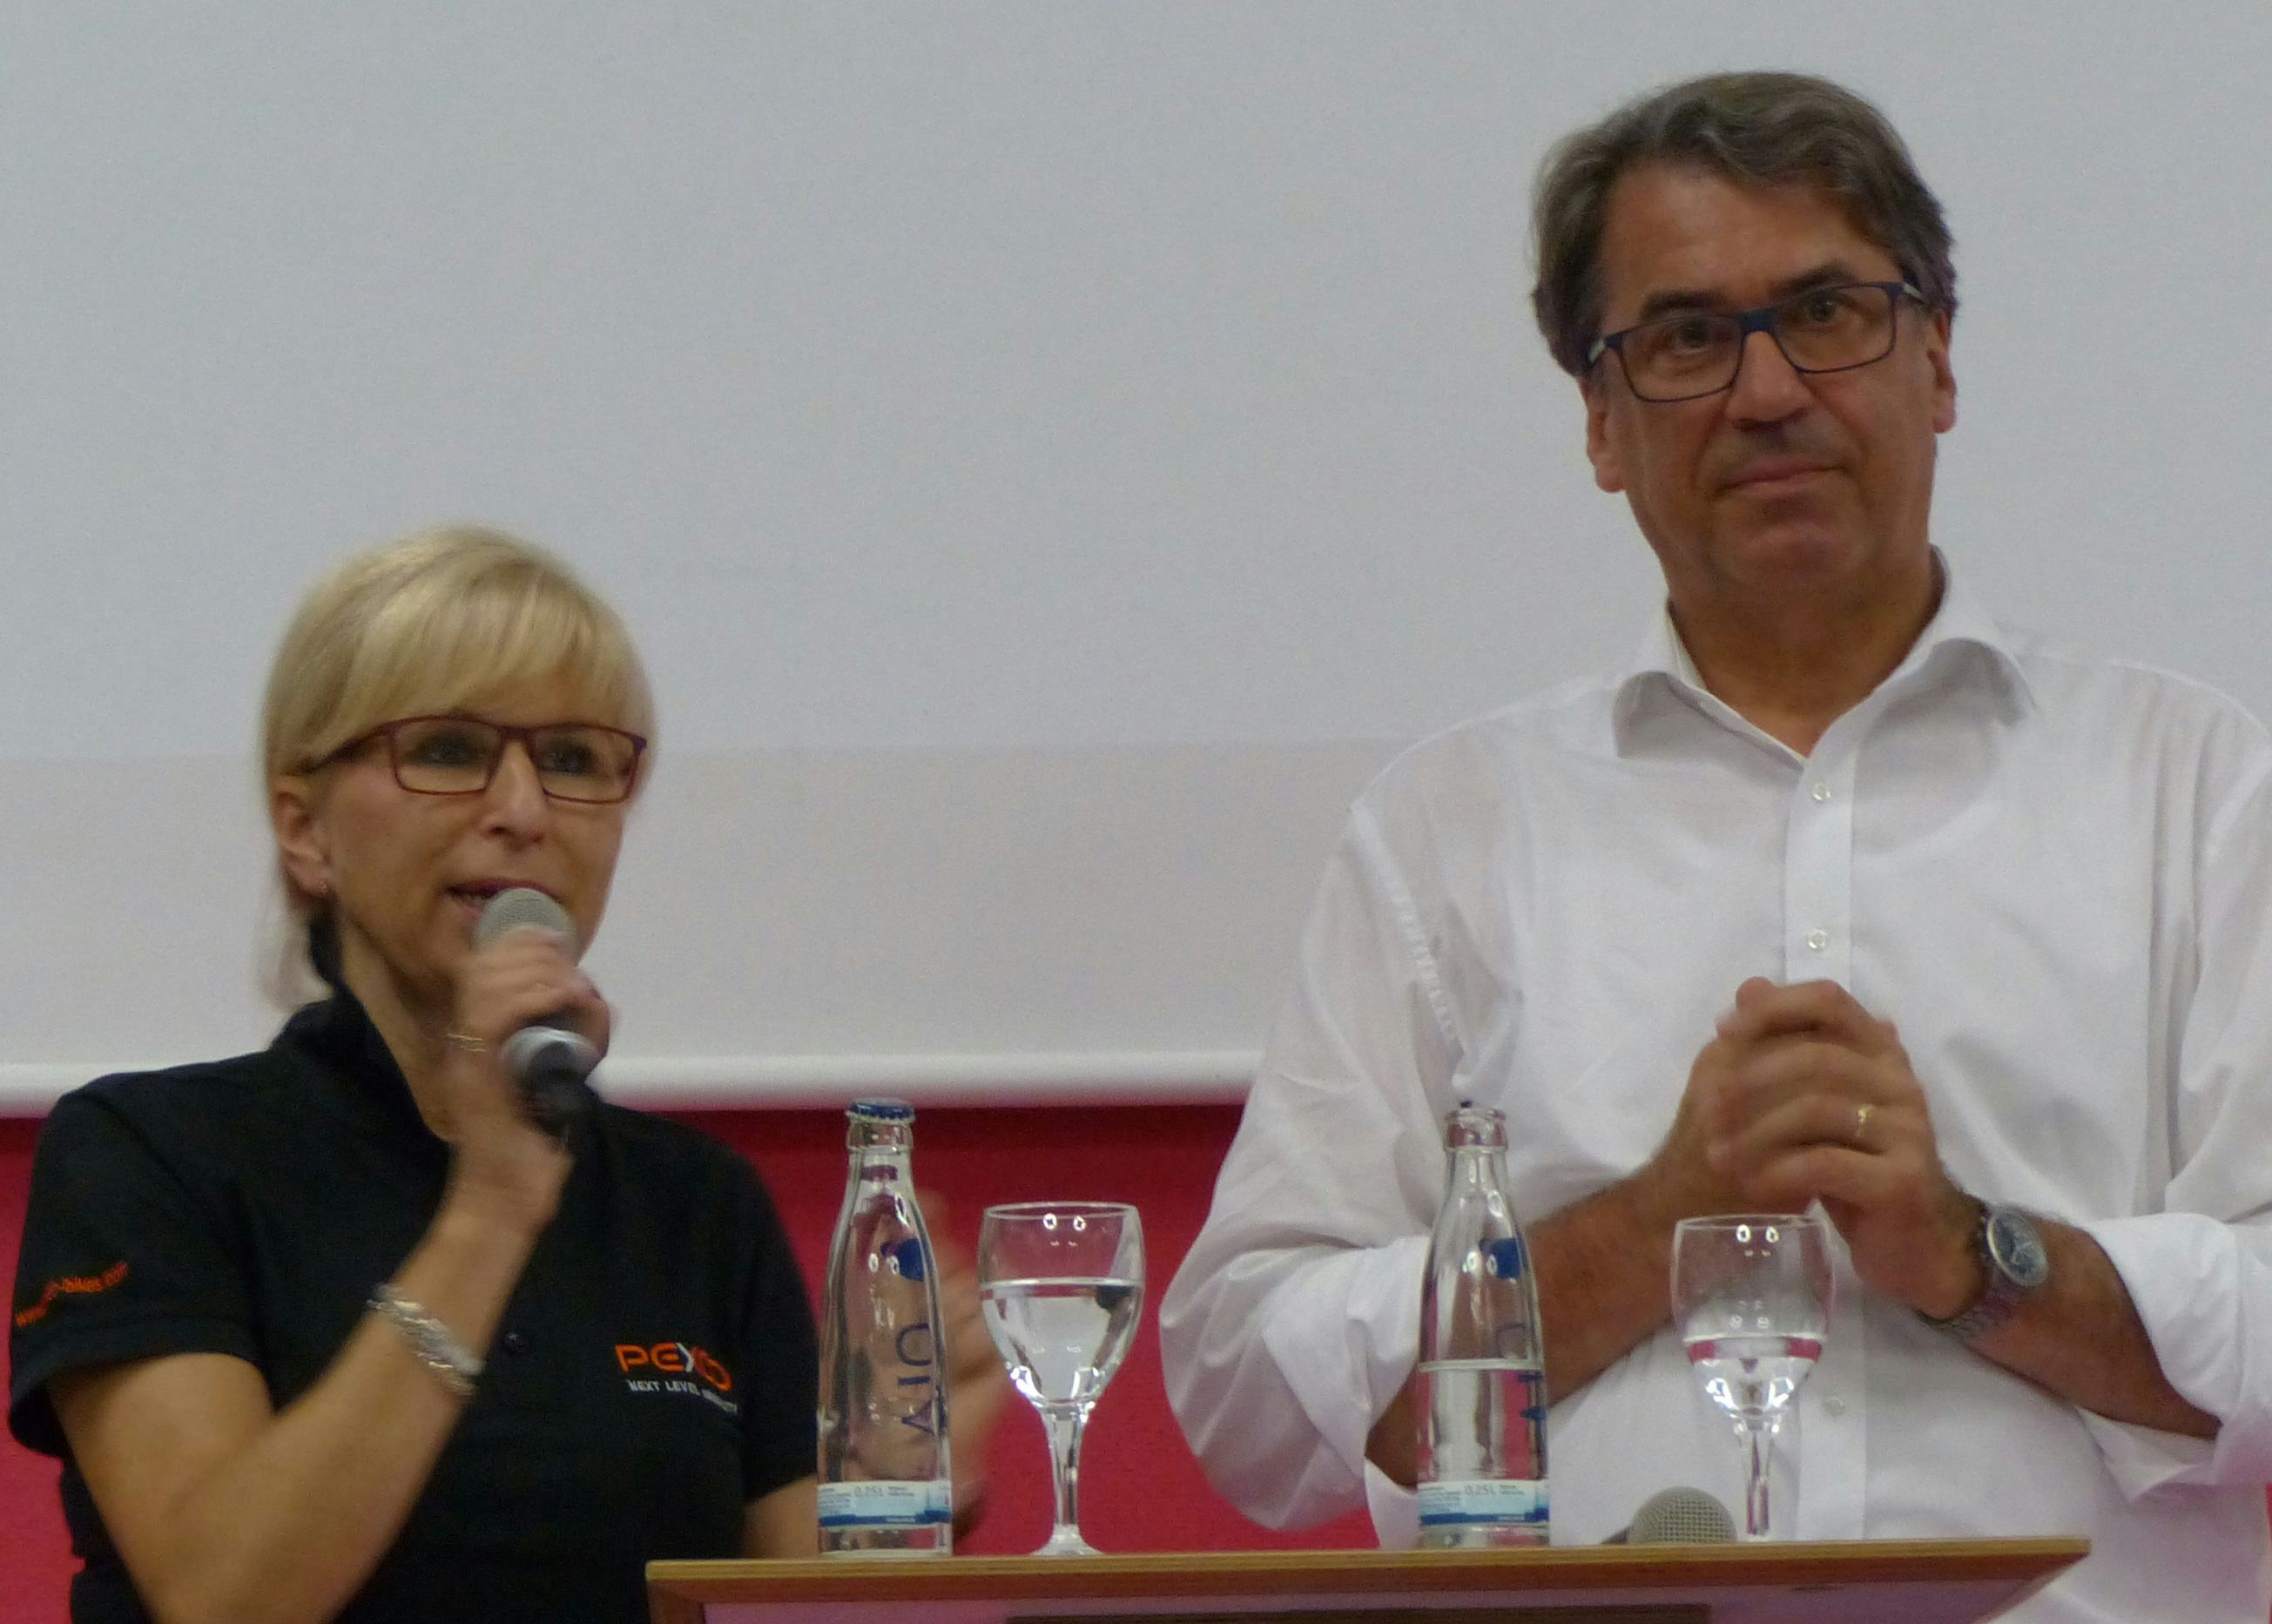 Susanne Puello and her business partner Stefan Pierer of KTM Industries were enthusiastically welcomed by over 250 attendees at today’s Pexco presentation. – Photo Bike Europe 